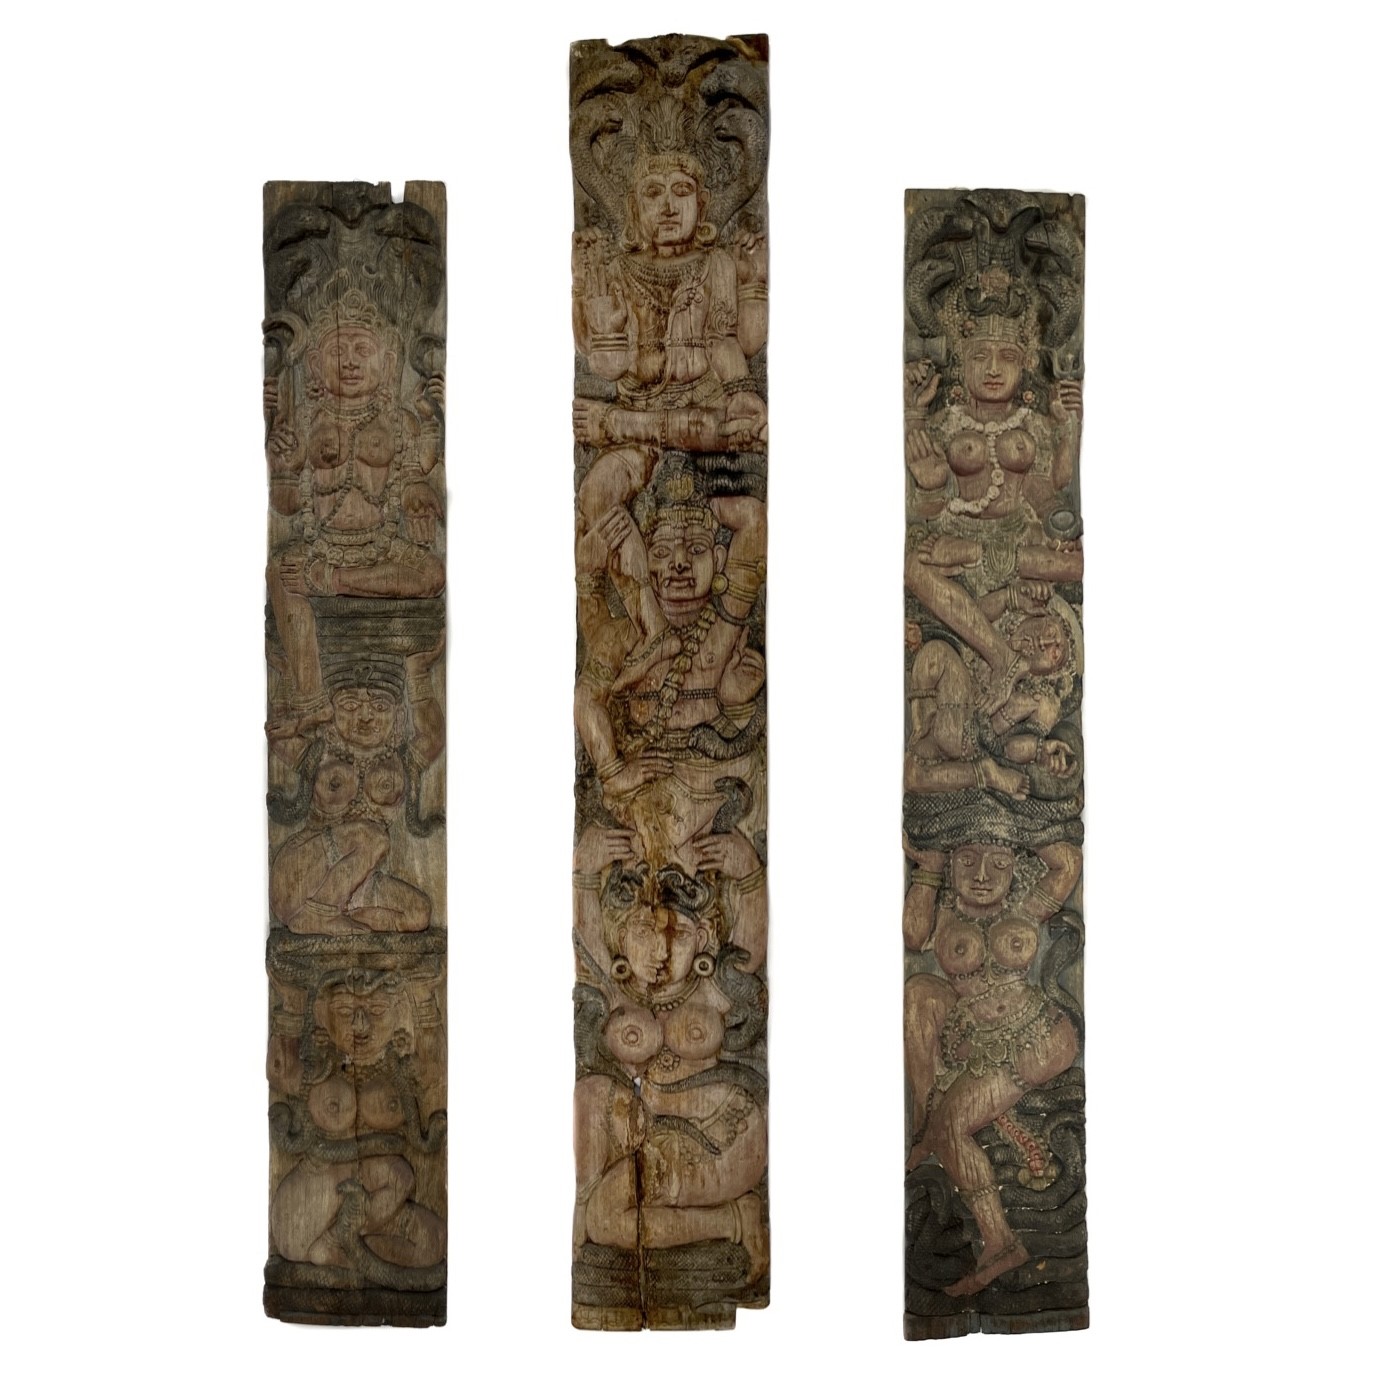 Lot 79 Three Large Carved Wood Tantric Shiva Temple